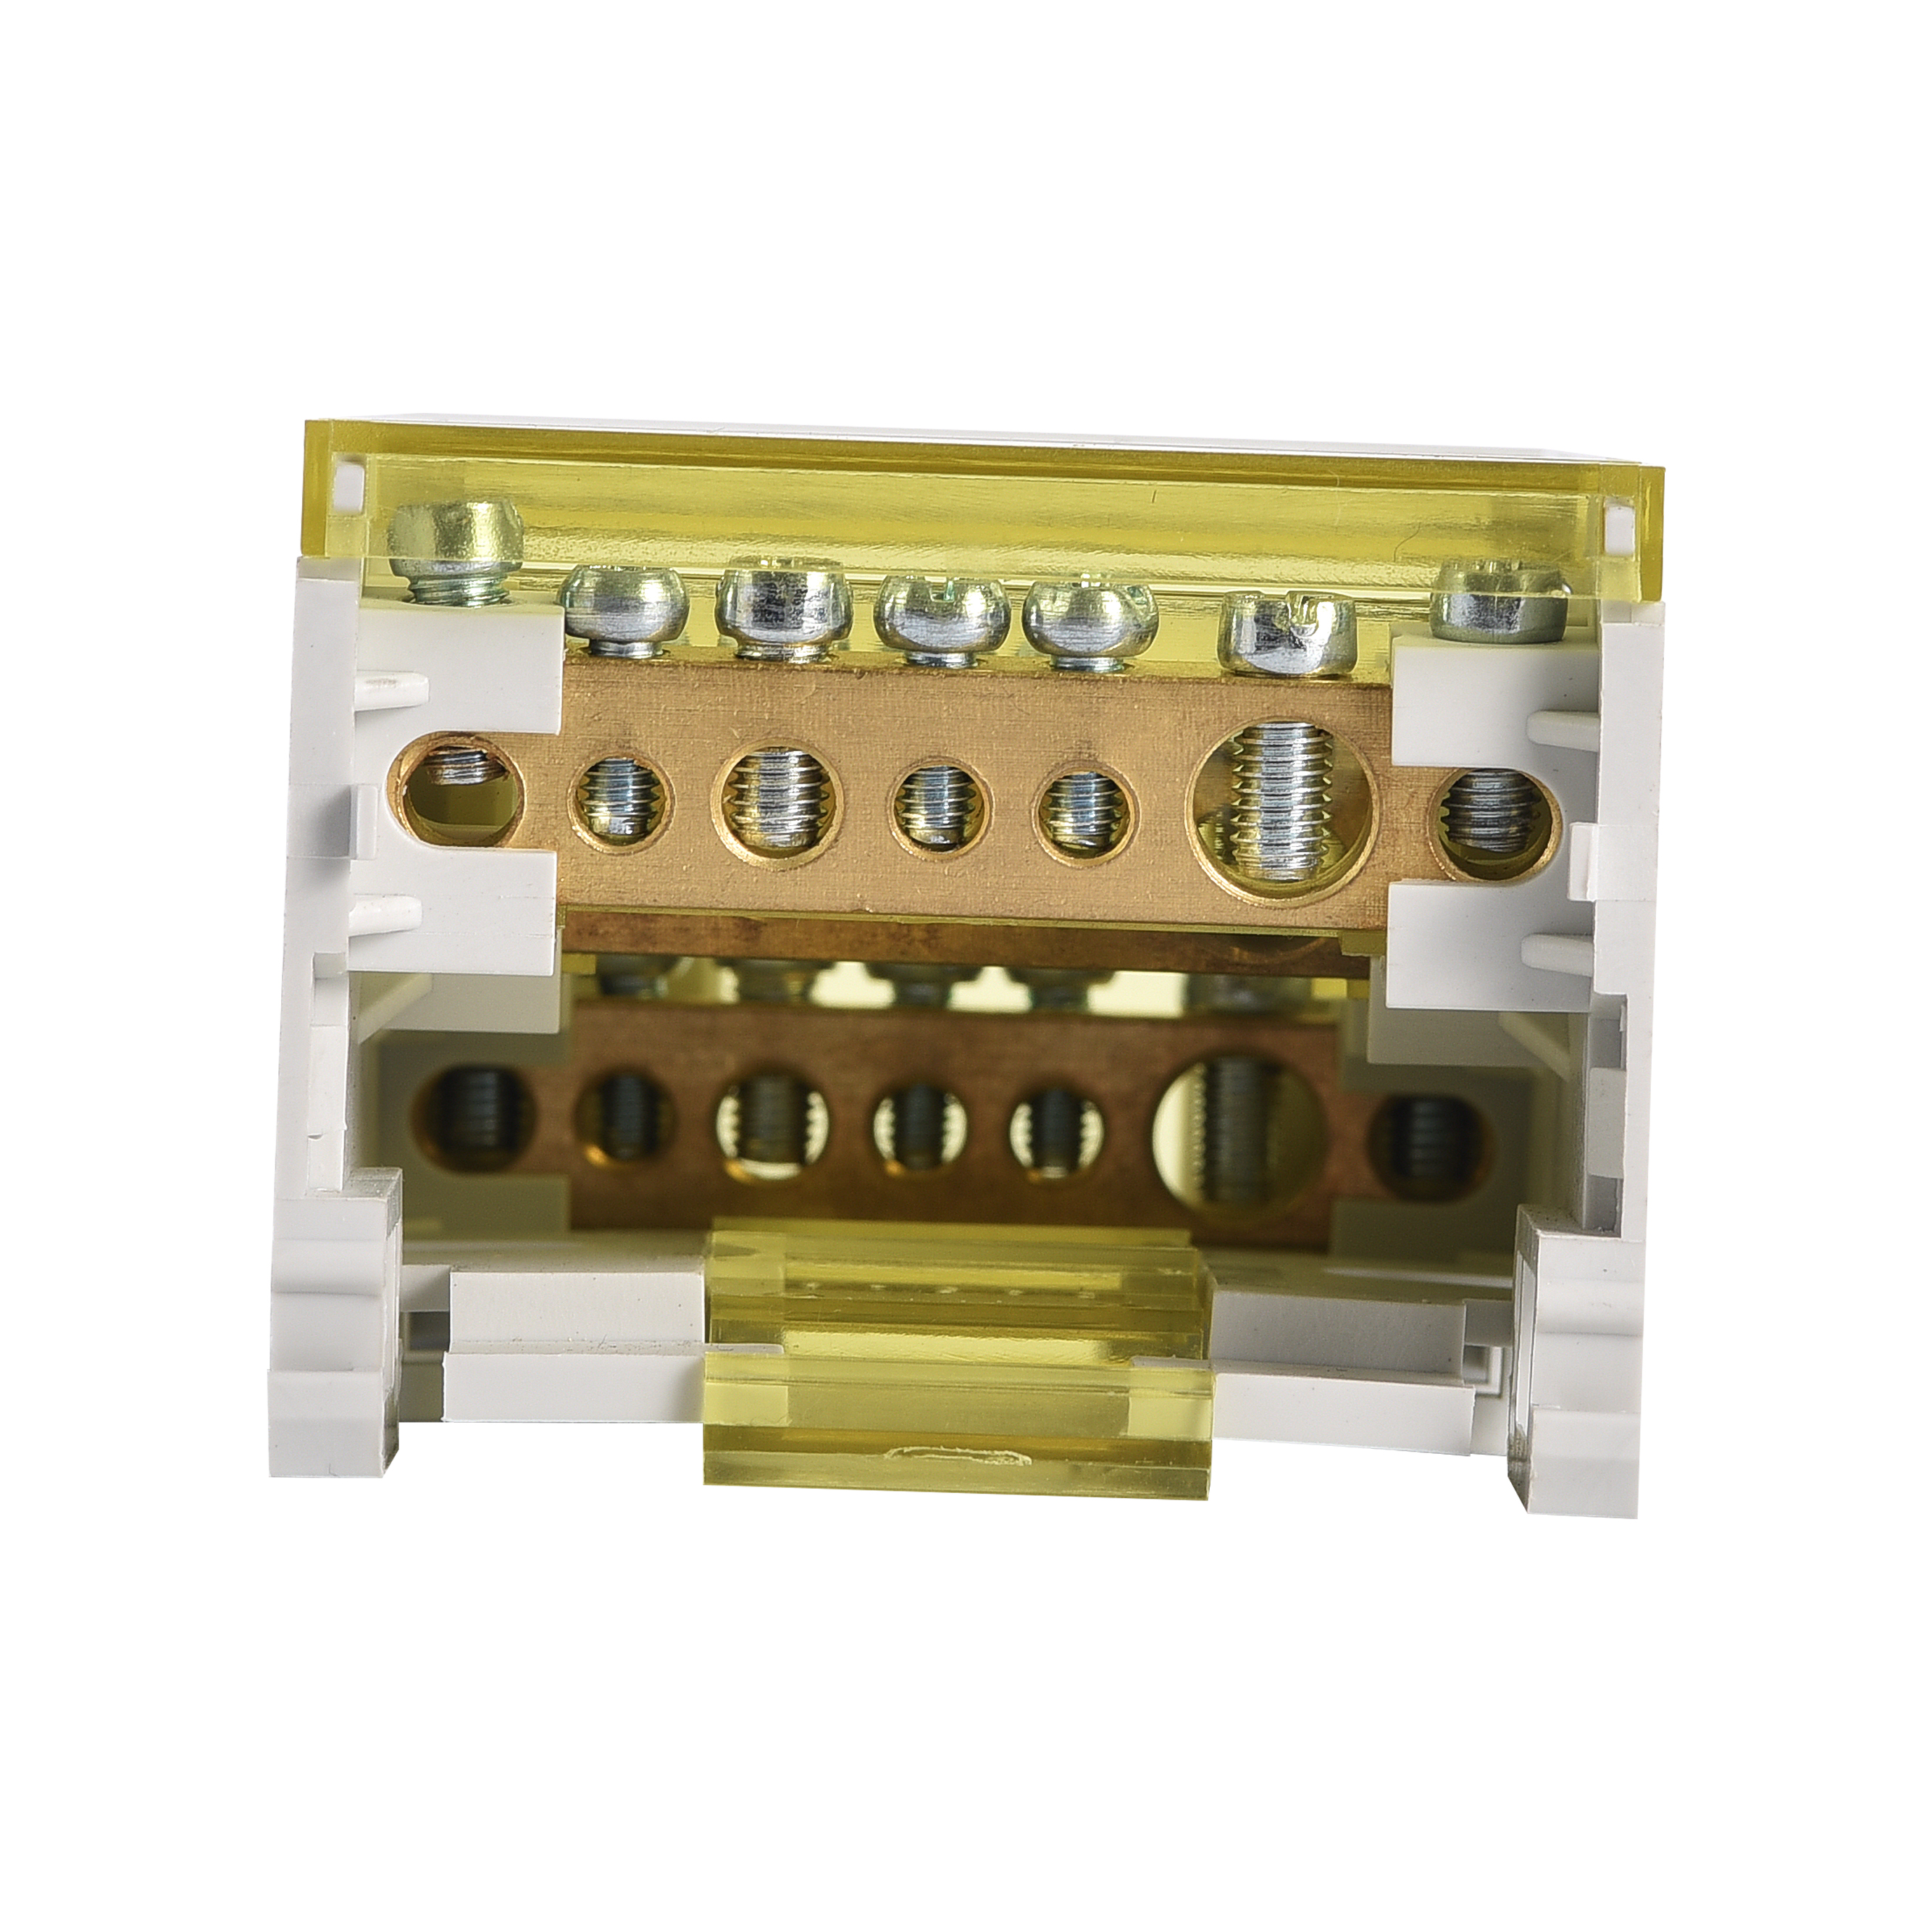 Stranded Conductor Cabinet Terminals